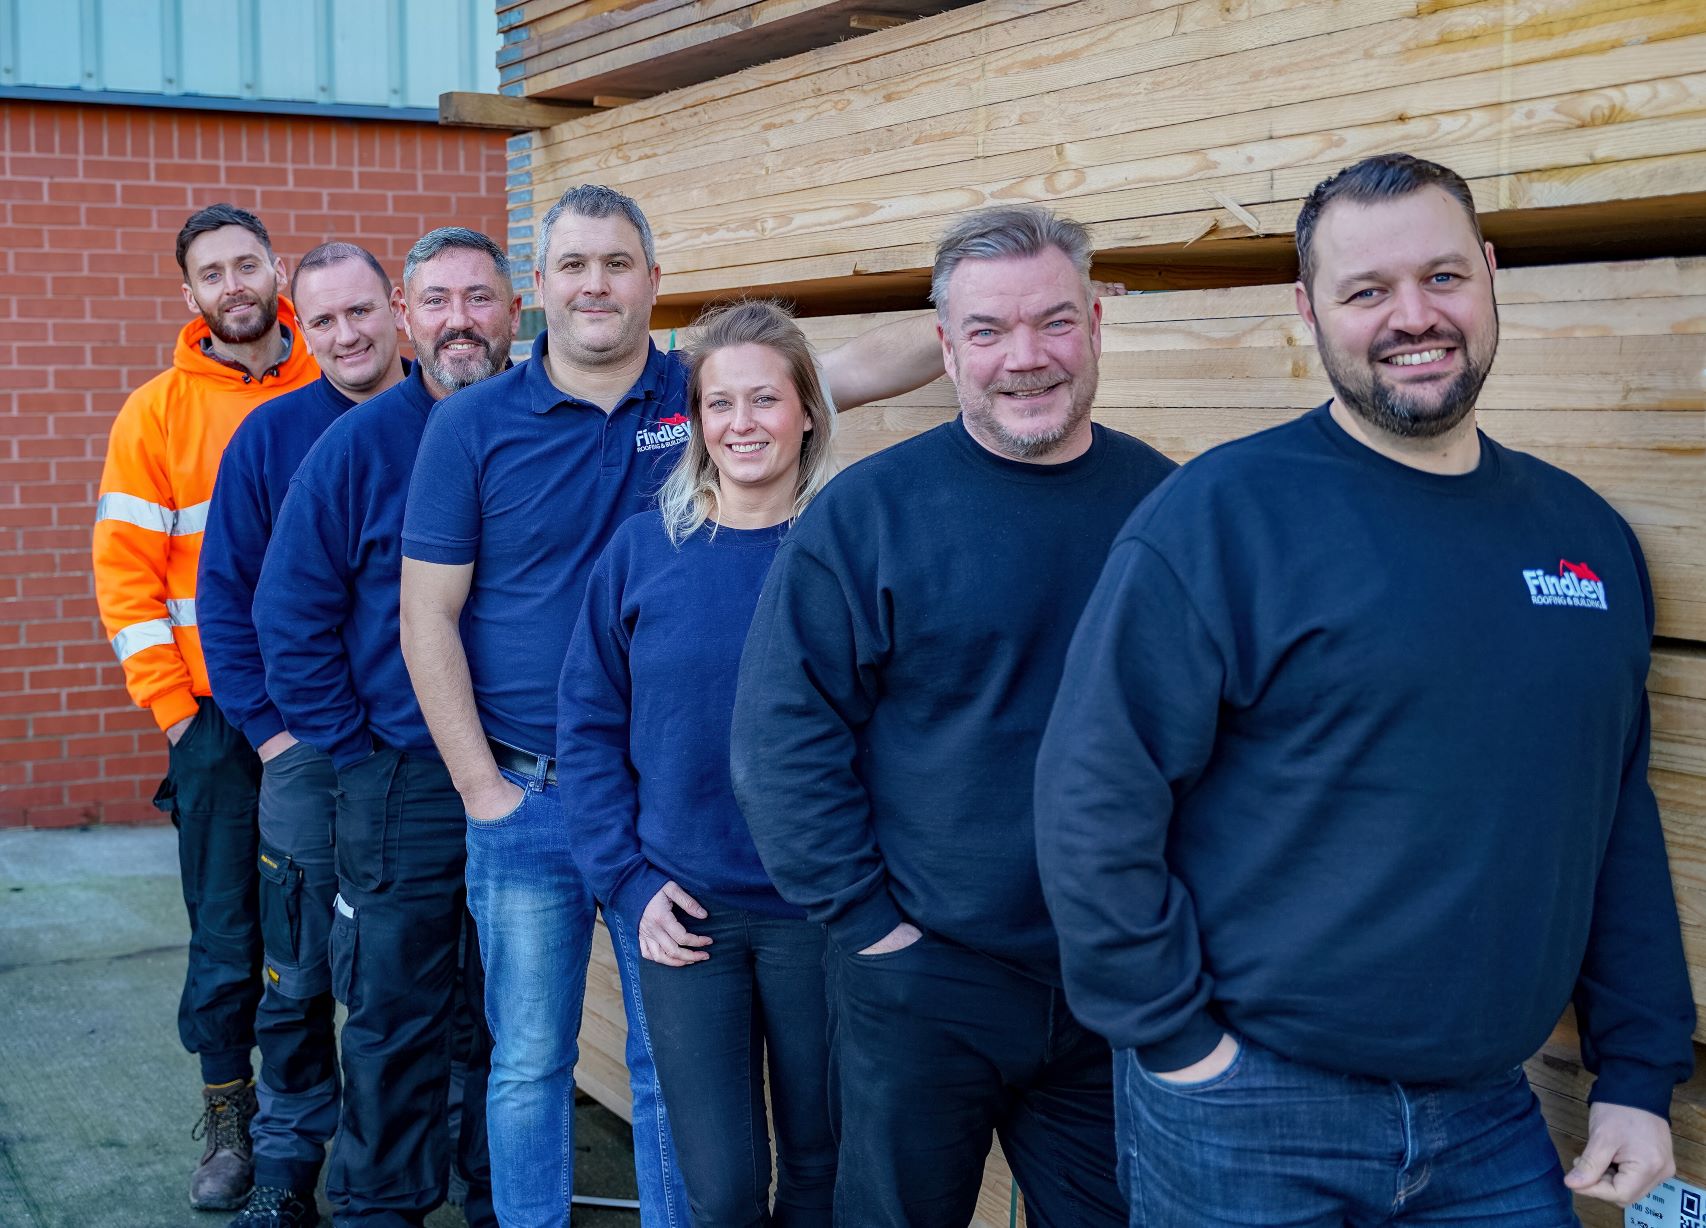 (L-R) Scaffolding manager Ricky Hubber, roofing estimator Ian Snow, roofing estimator Eddie Cox, finance manager Richard McClean, appointments co-ordinator Nicole McQuaker, sales & marketing manager Richie Carrigan and managing director Dean Coombe